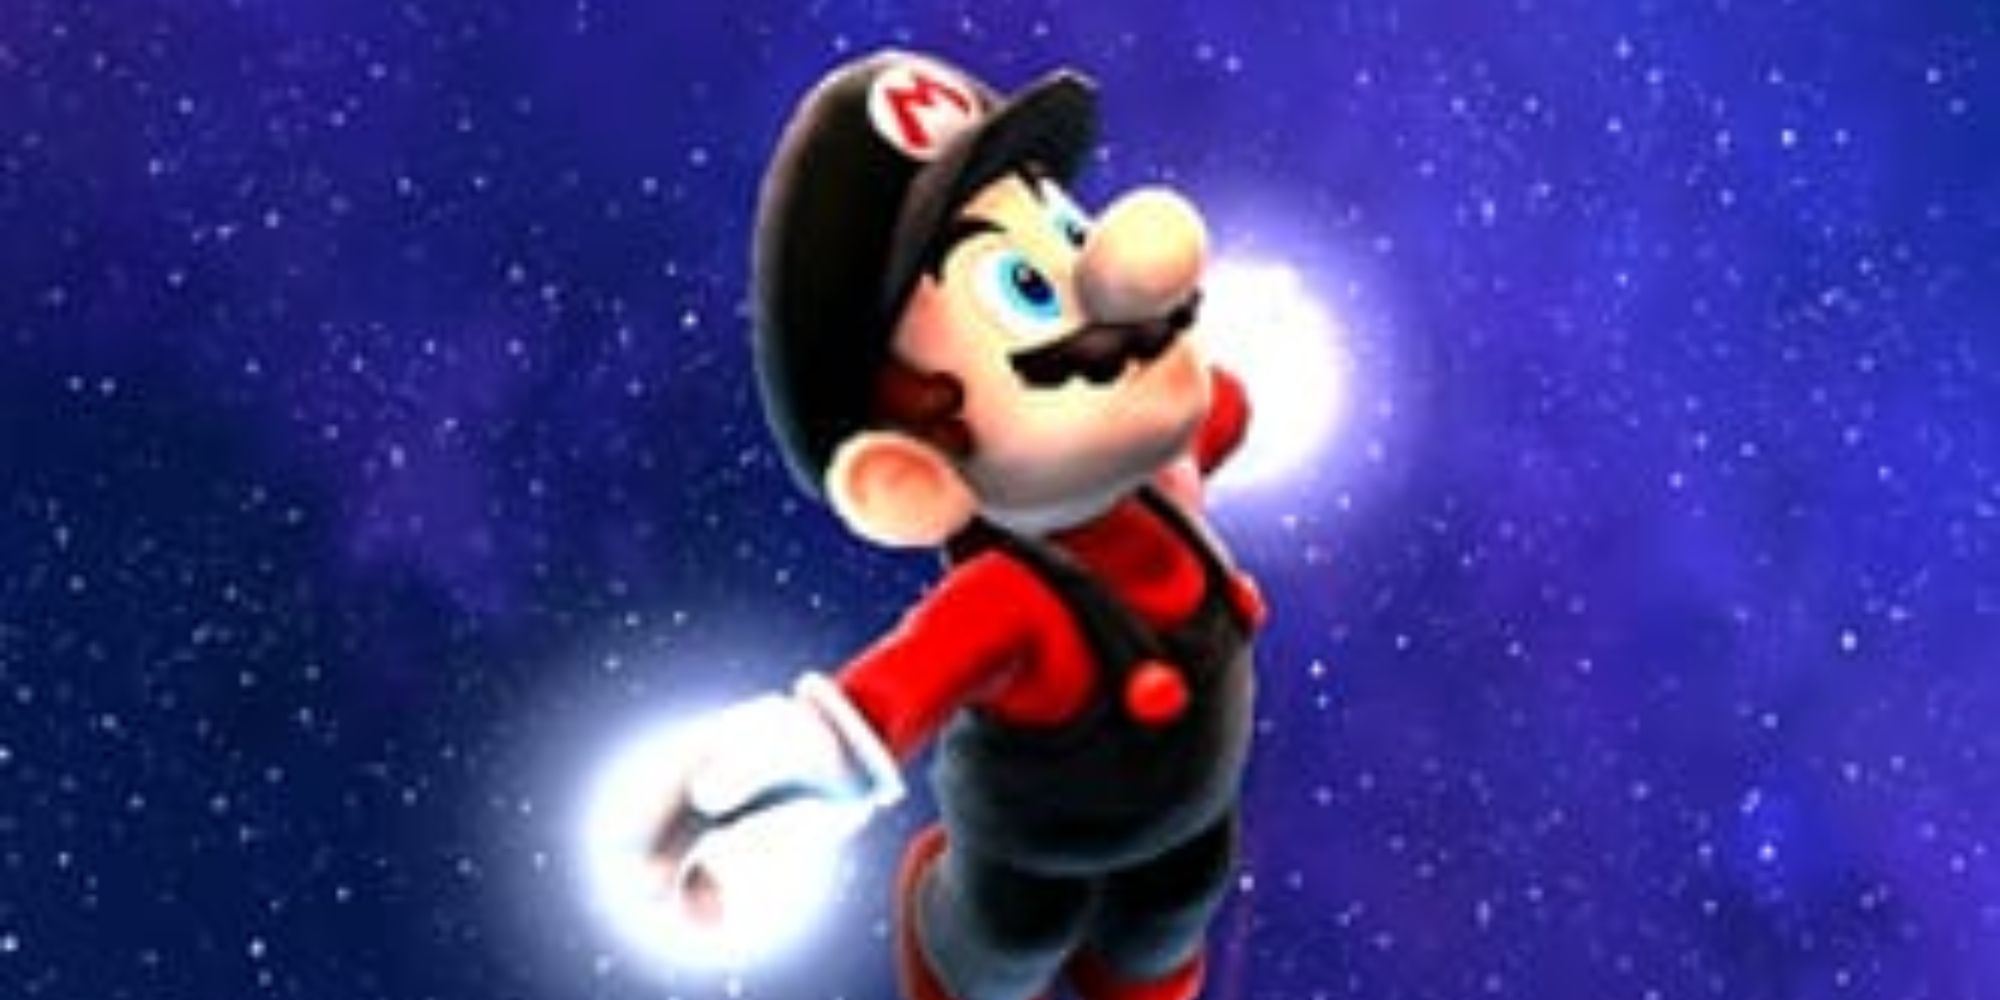 Mario flying in space